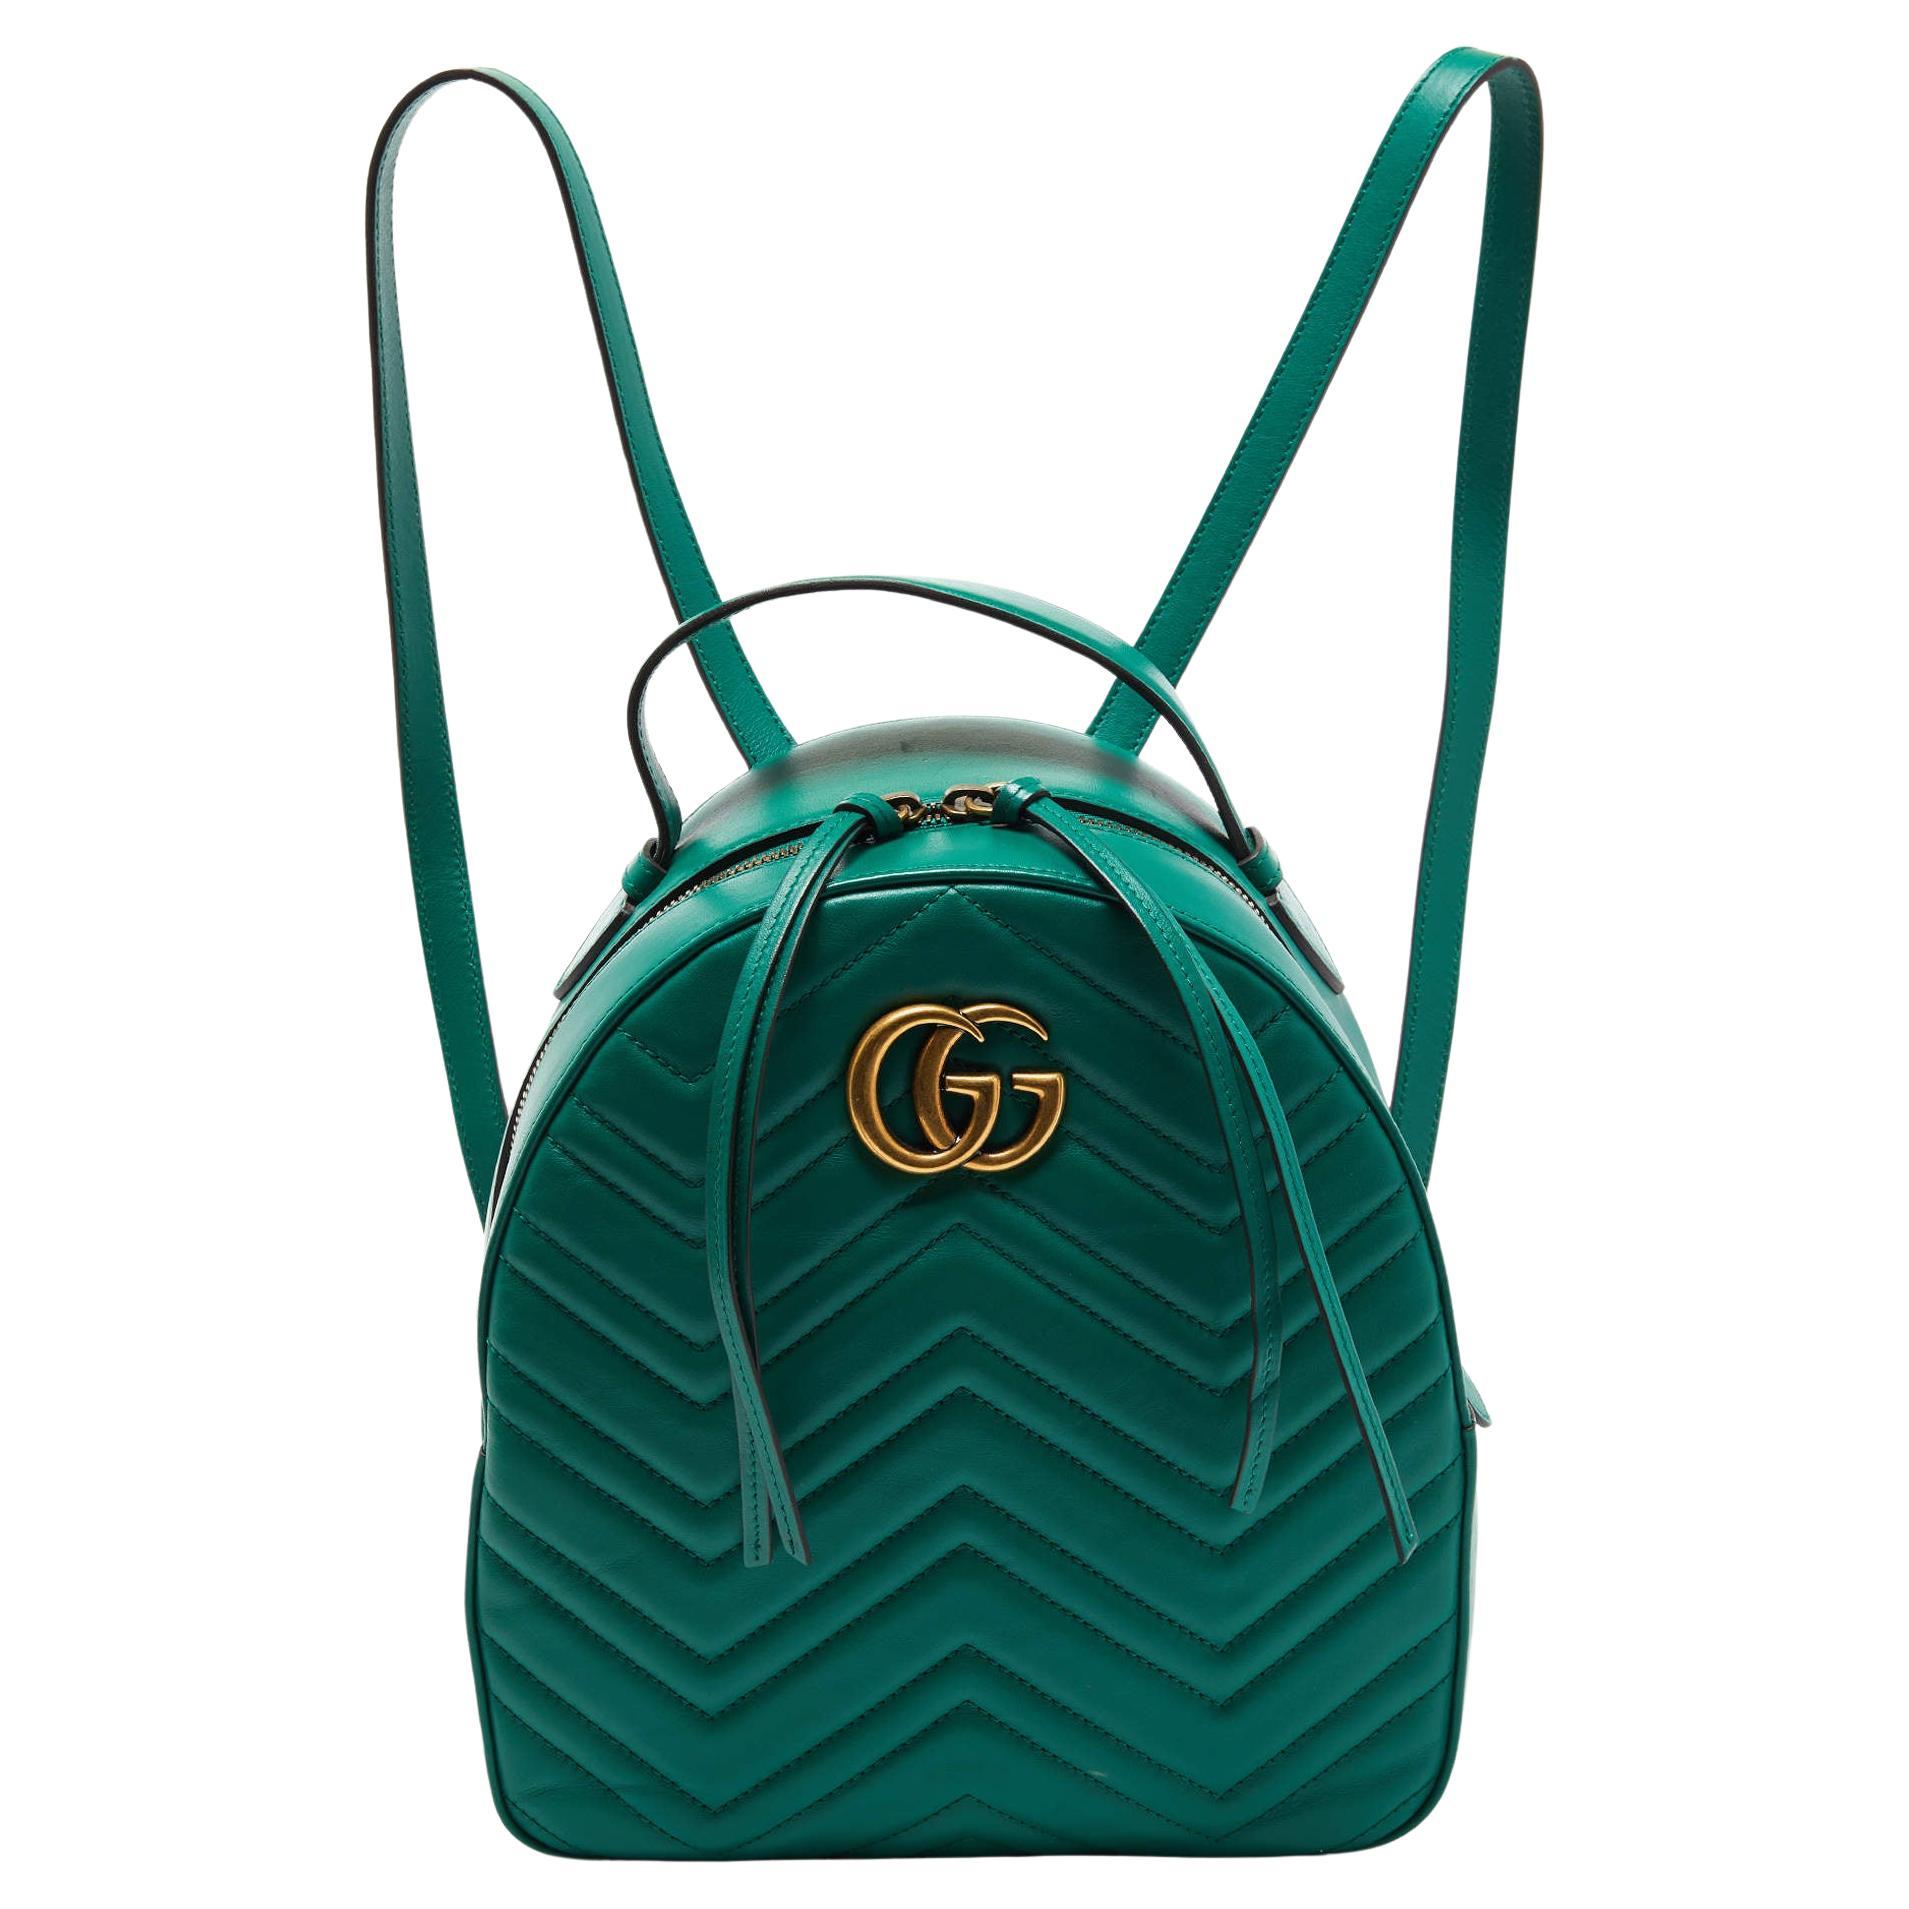 Gucci Green Matelassé Leather GG Marmont Backpack For Sale